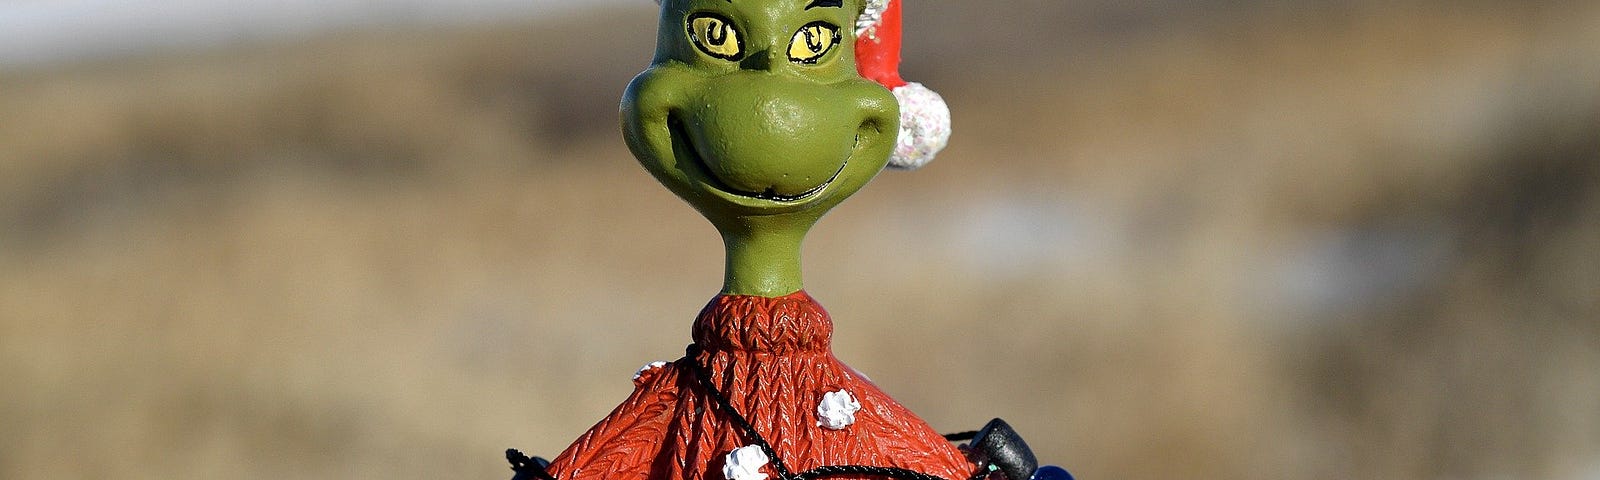 Simple Tips to Deal With Holiday Overwhelm December is a great time to overcome your inner grinch by Aimée Gramblin on Medium